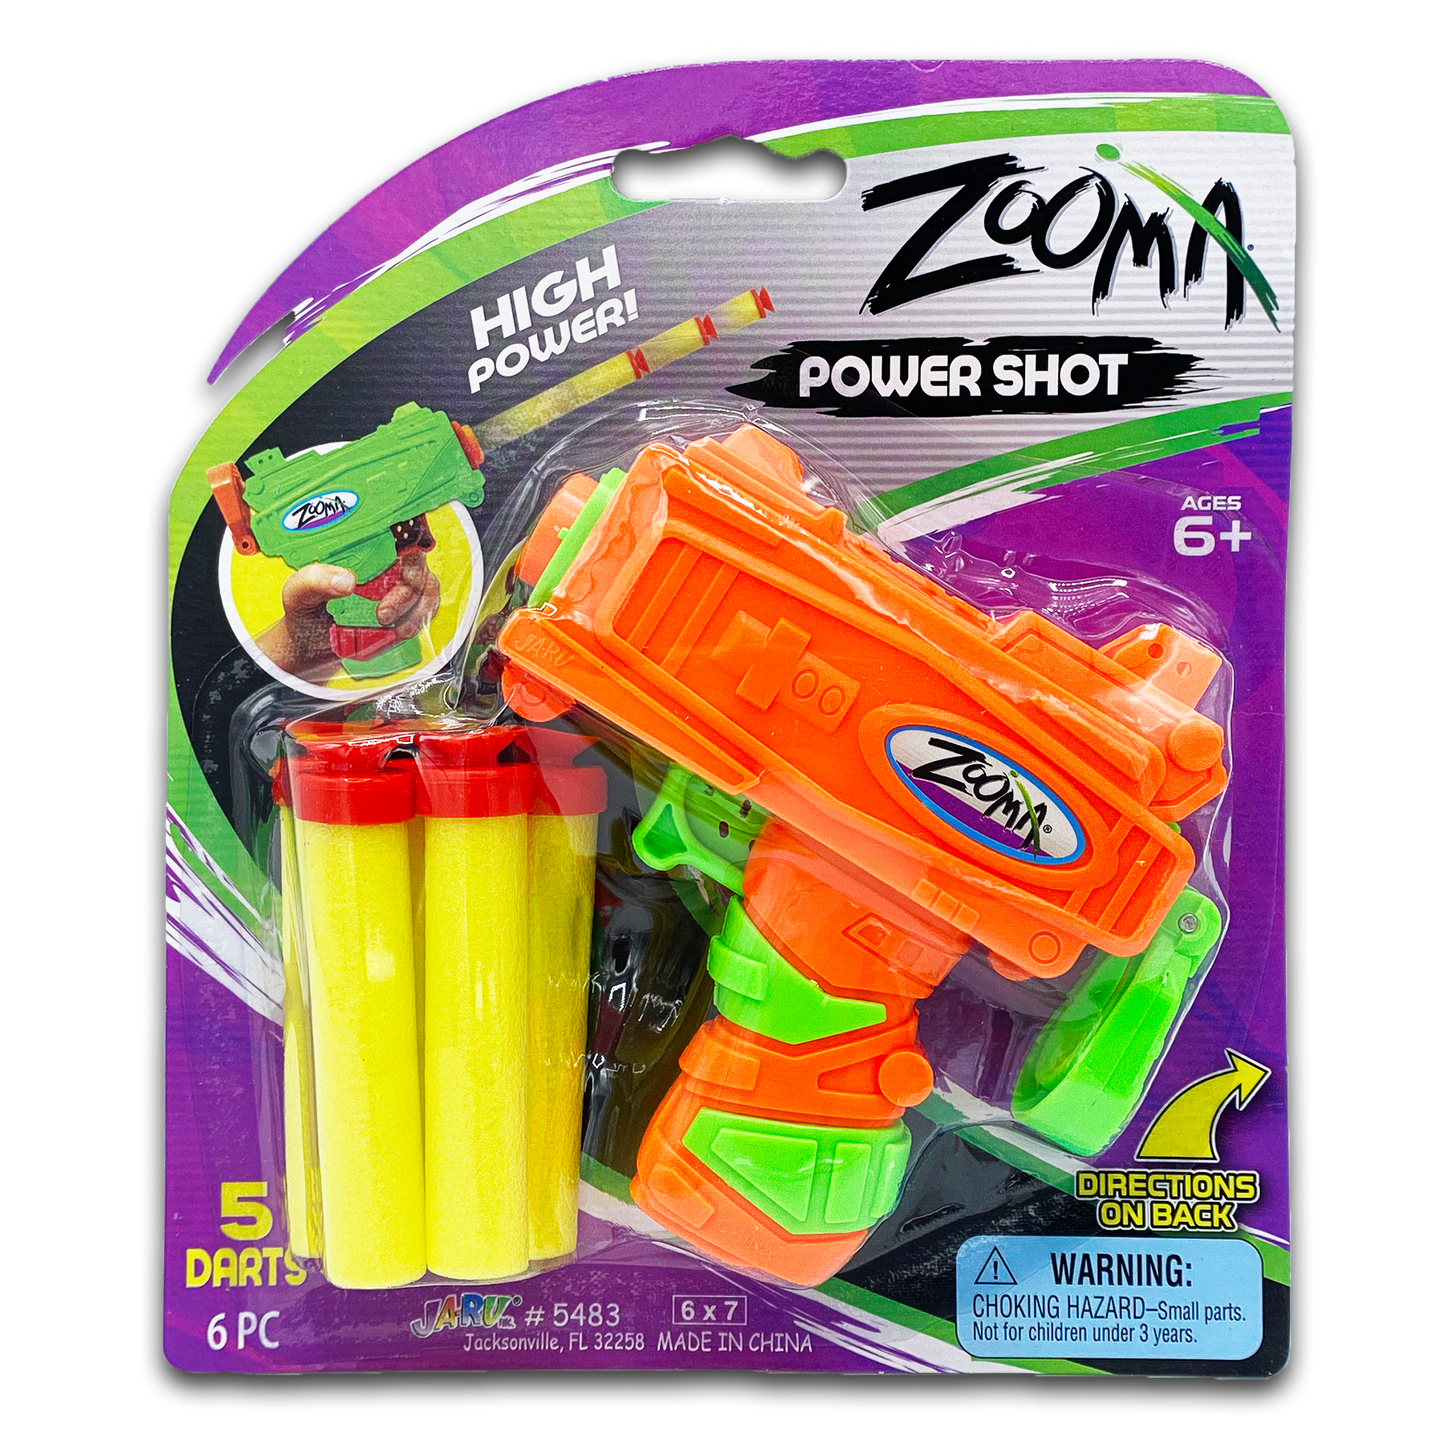 6PC ZOOMA POWER SHOT